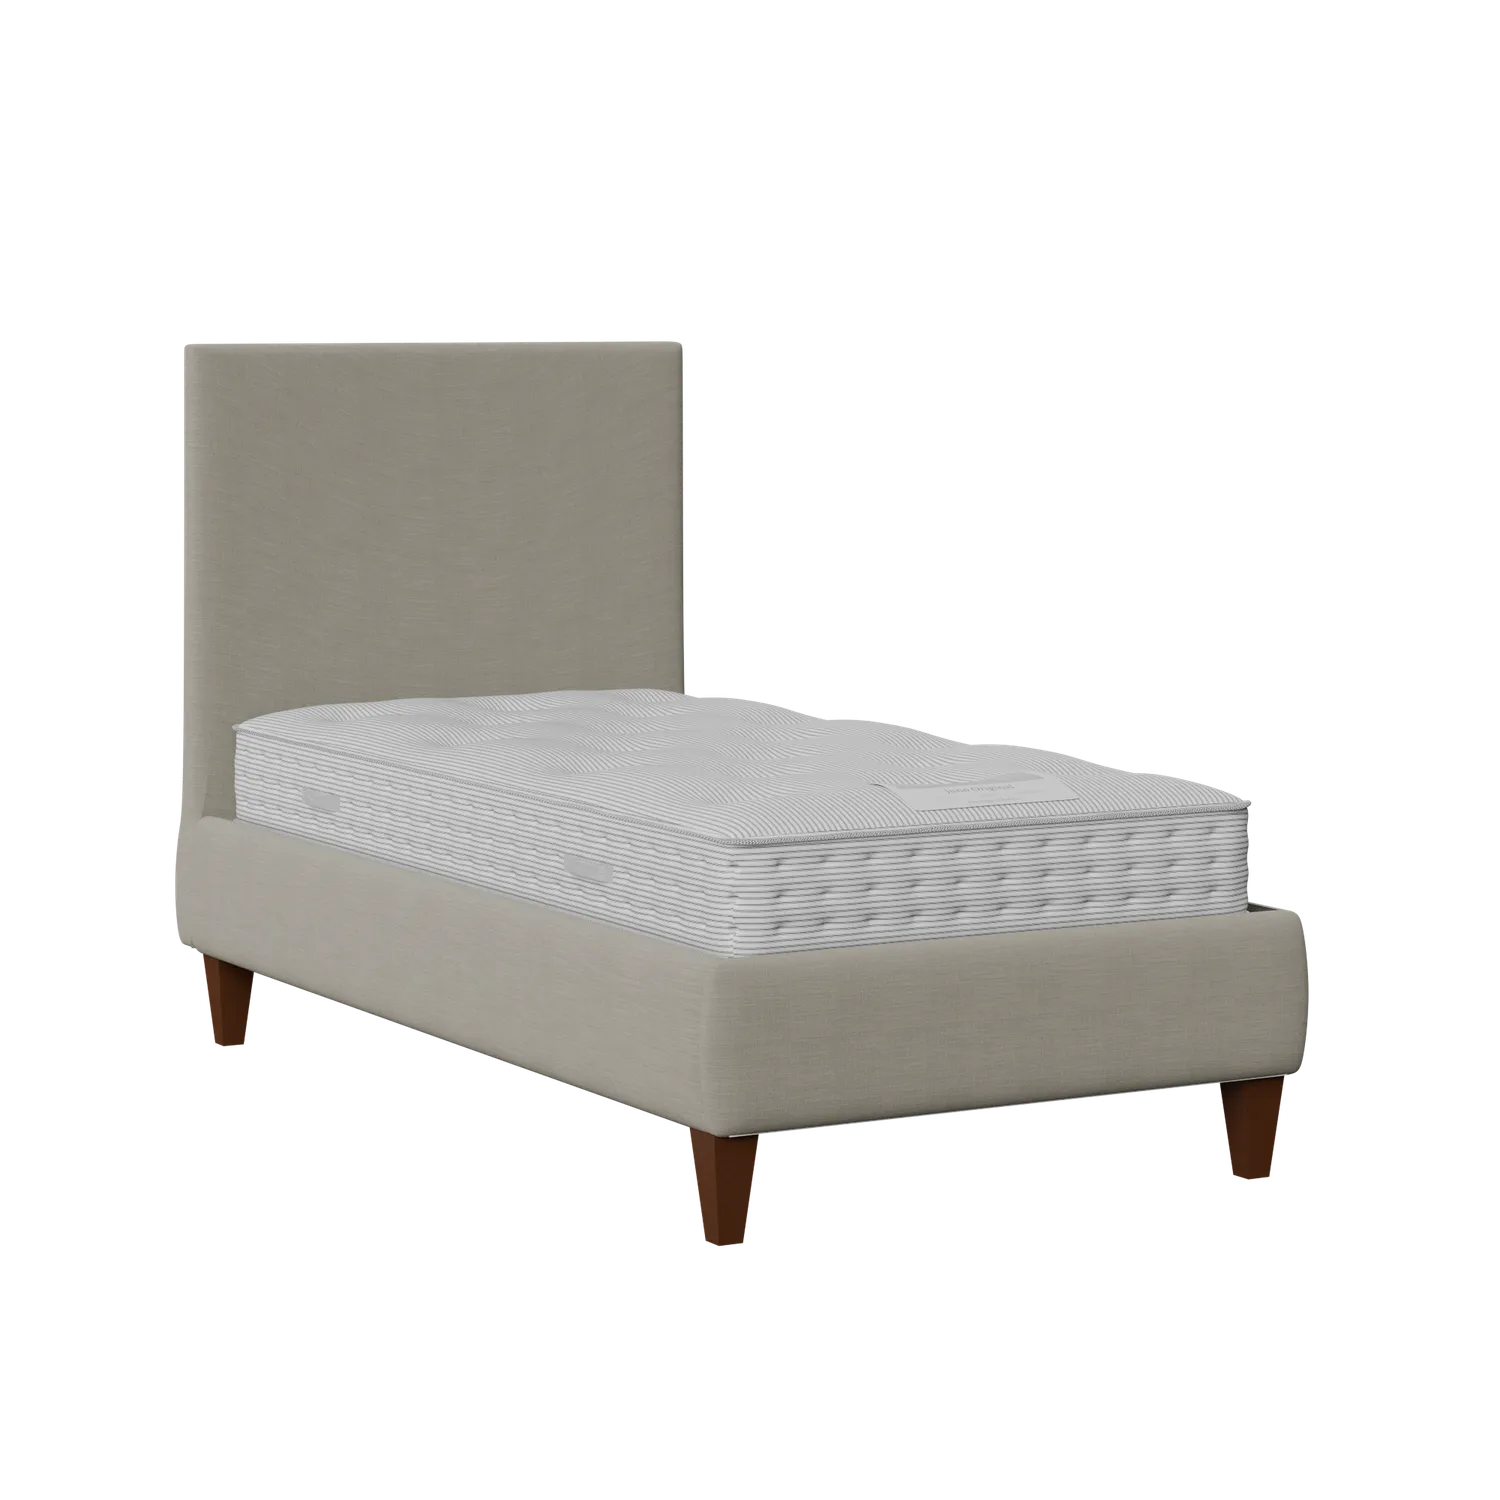 Yushan upholstered single bed in grey fabric